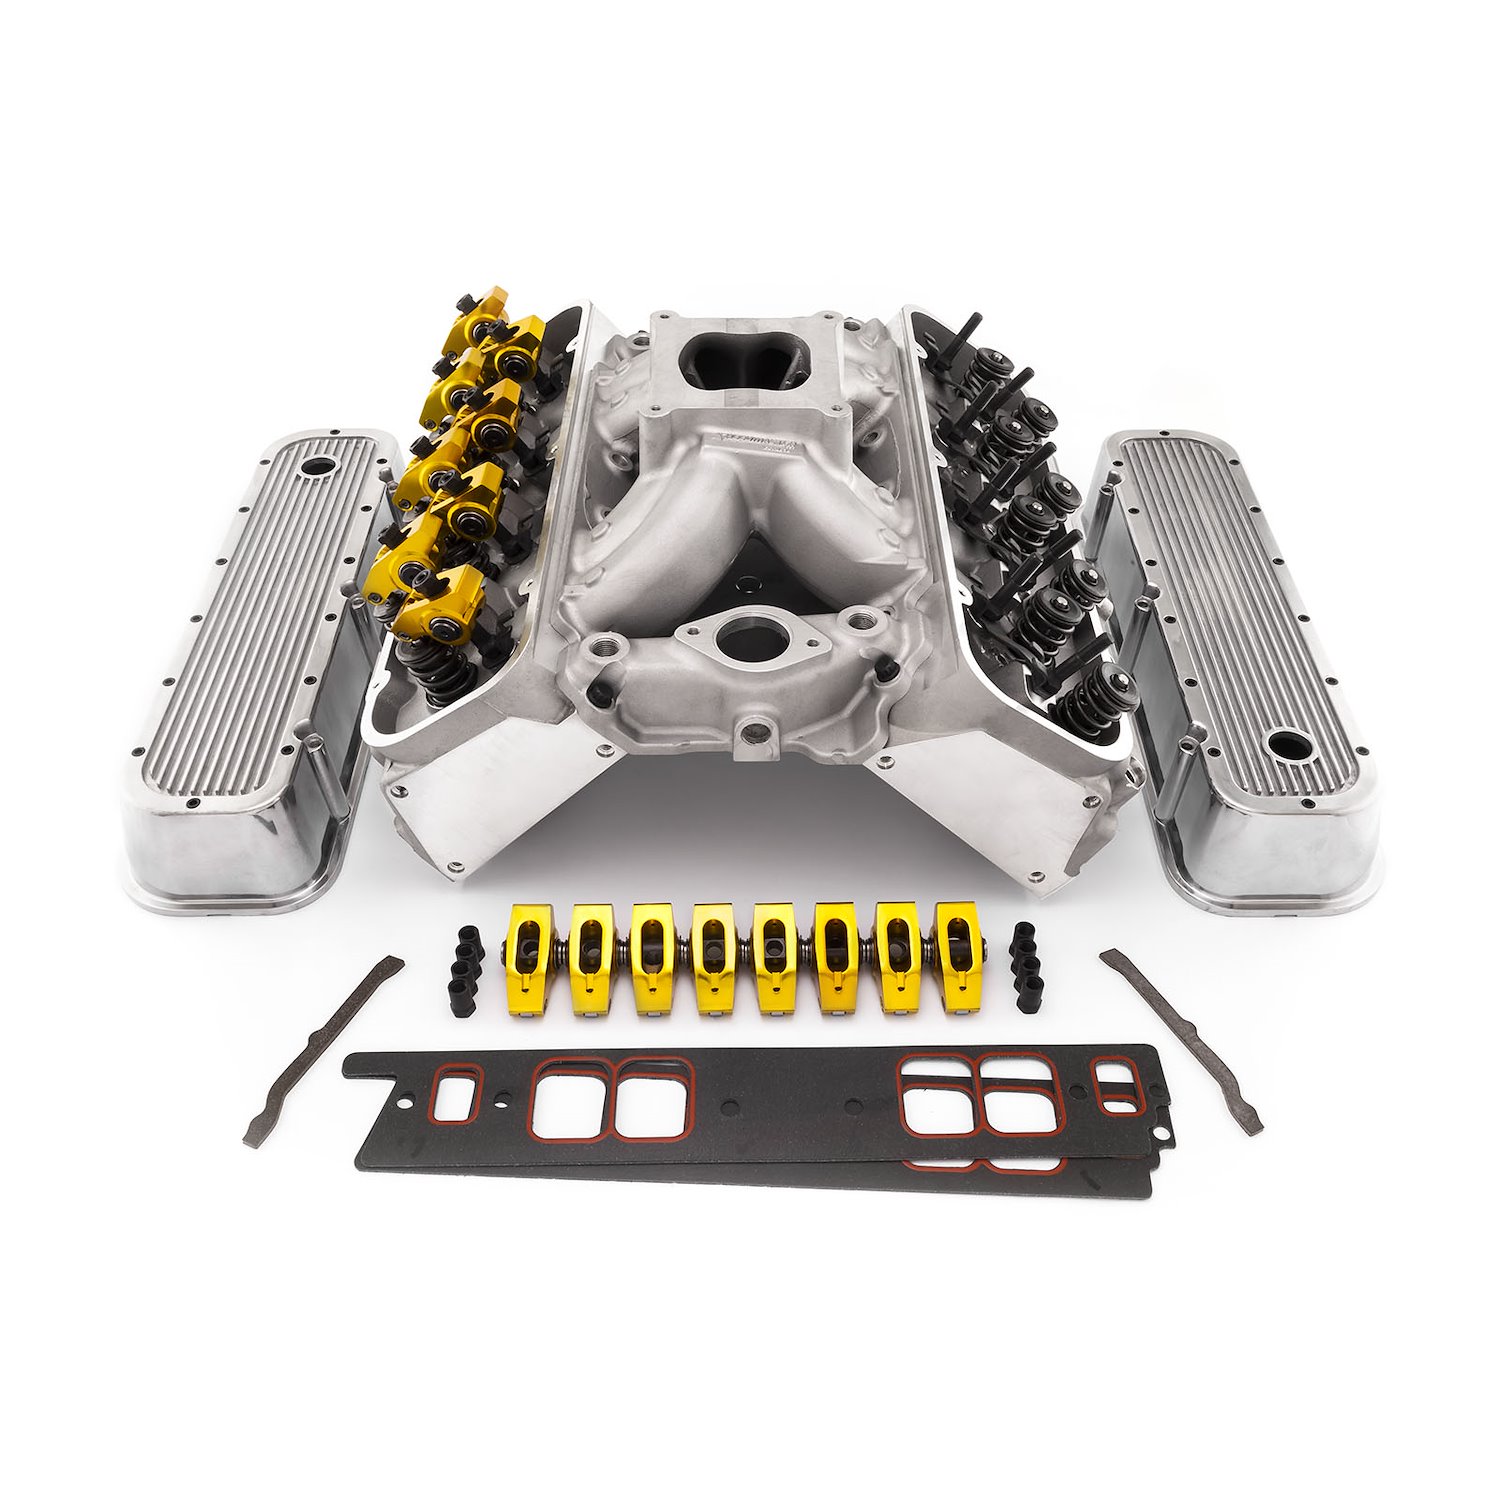 Street Series Hydraulic Flat Tappet Top End Engine Kit Big Block Chevy 454 Includes: